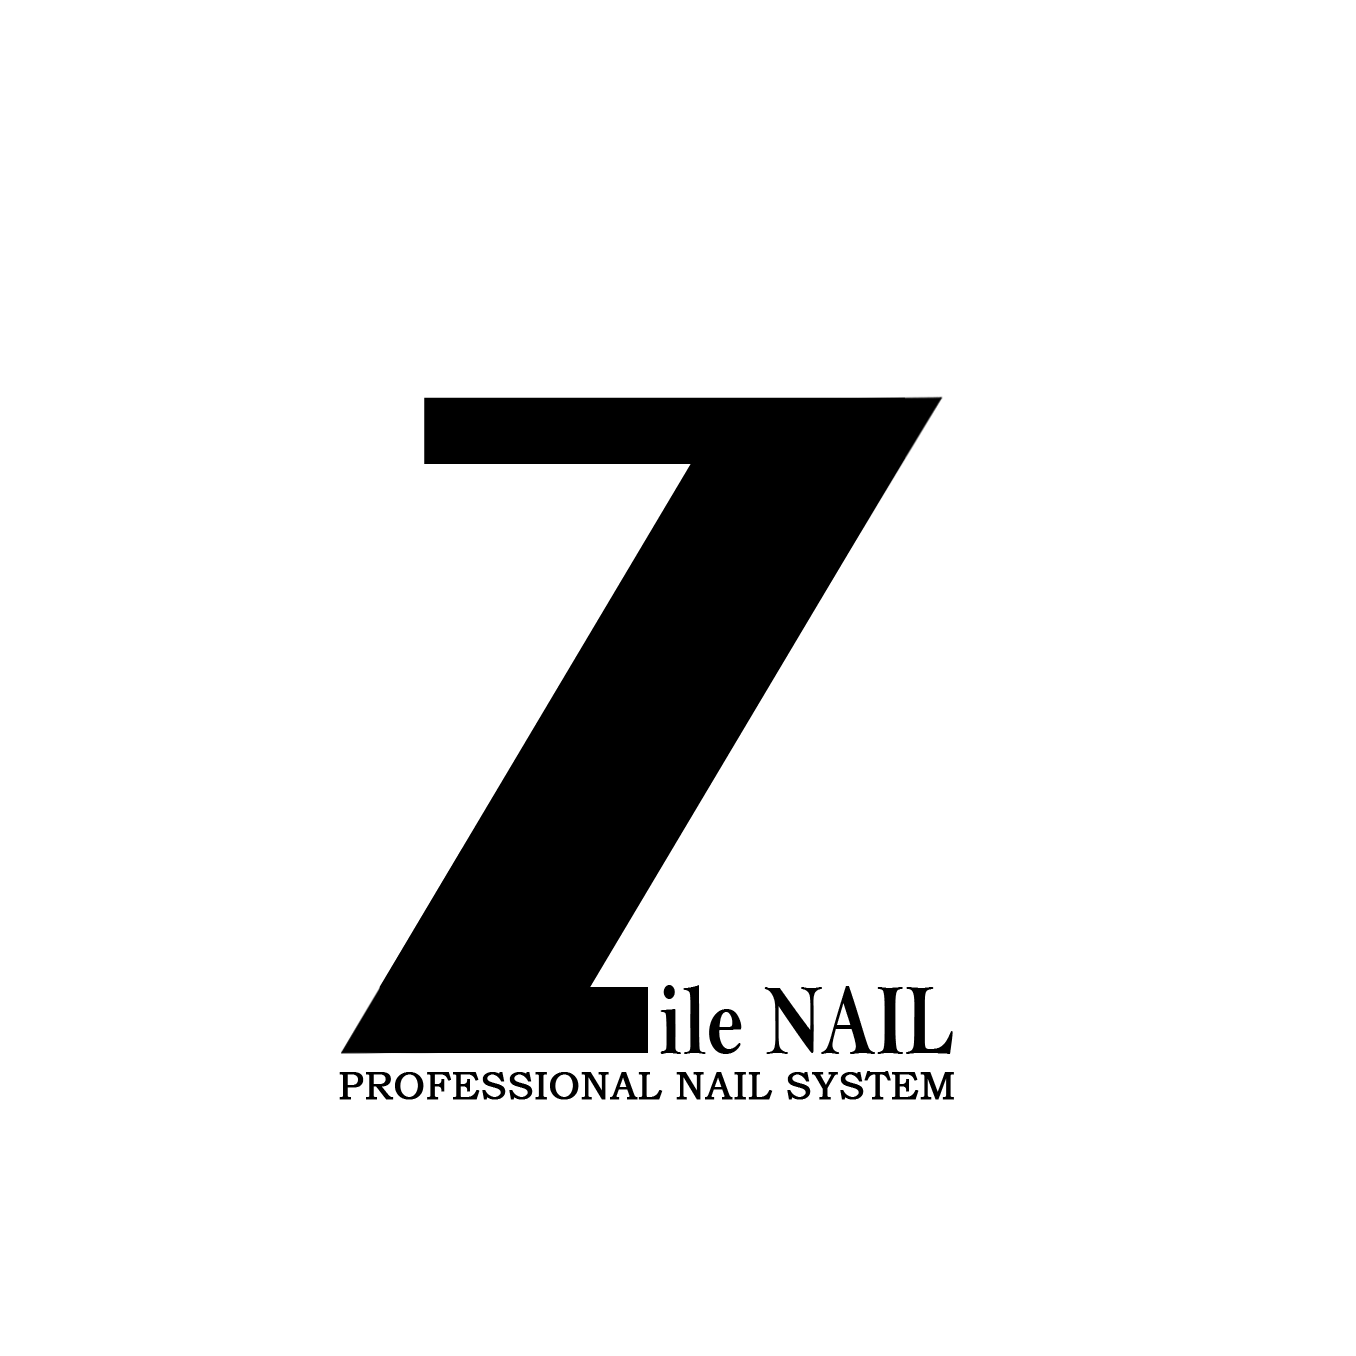 Zile Nail